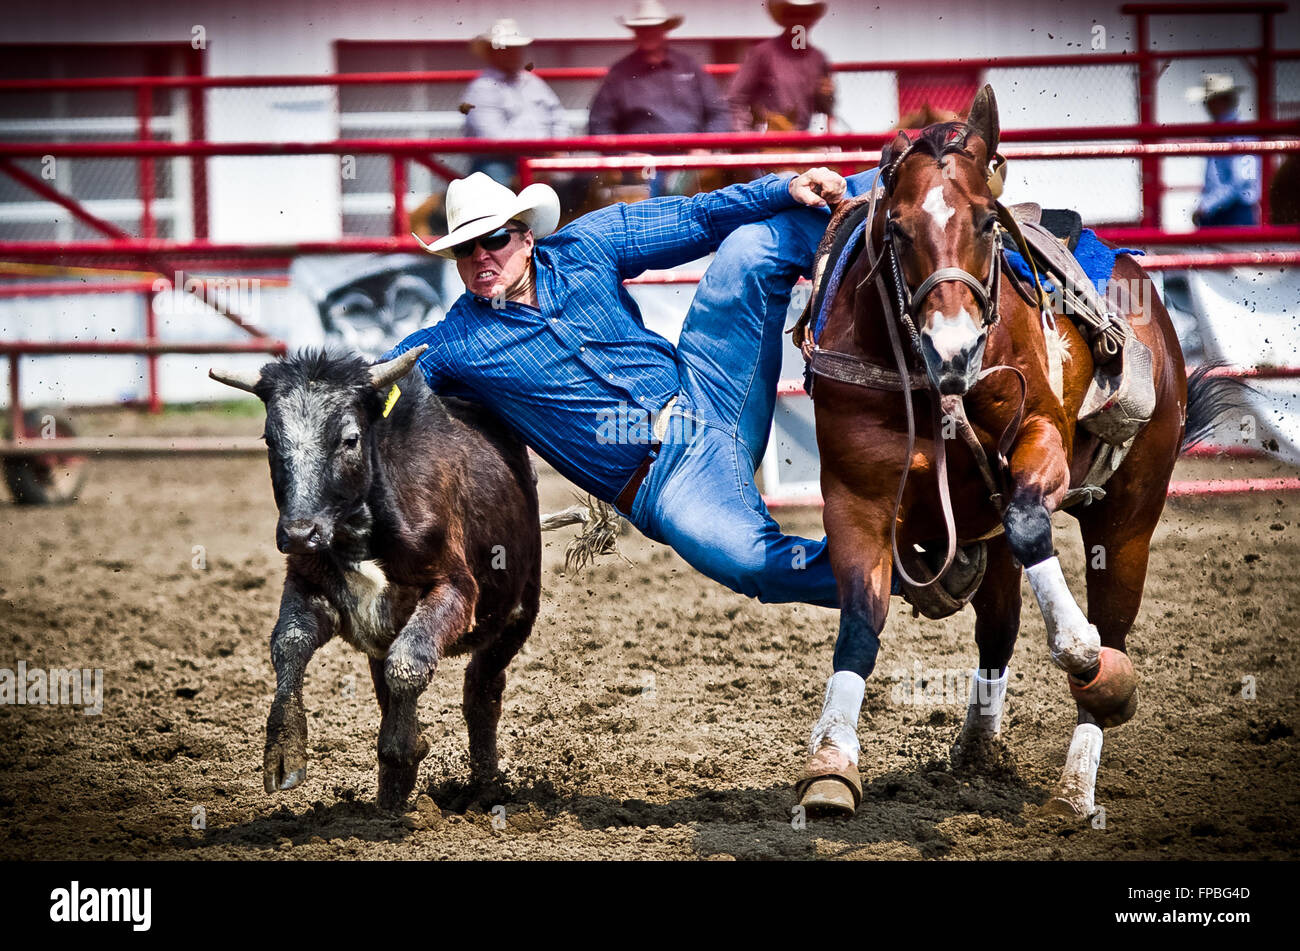 Cowboy leaving his horse to wrestle a steer. Stock Photo